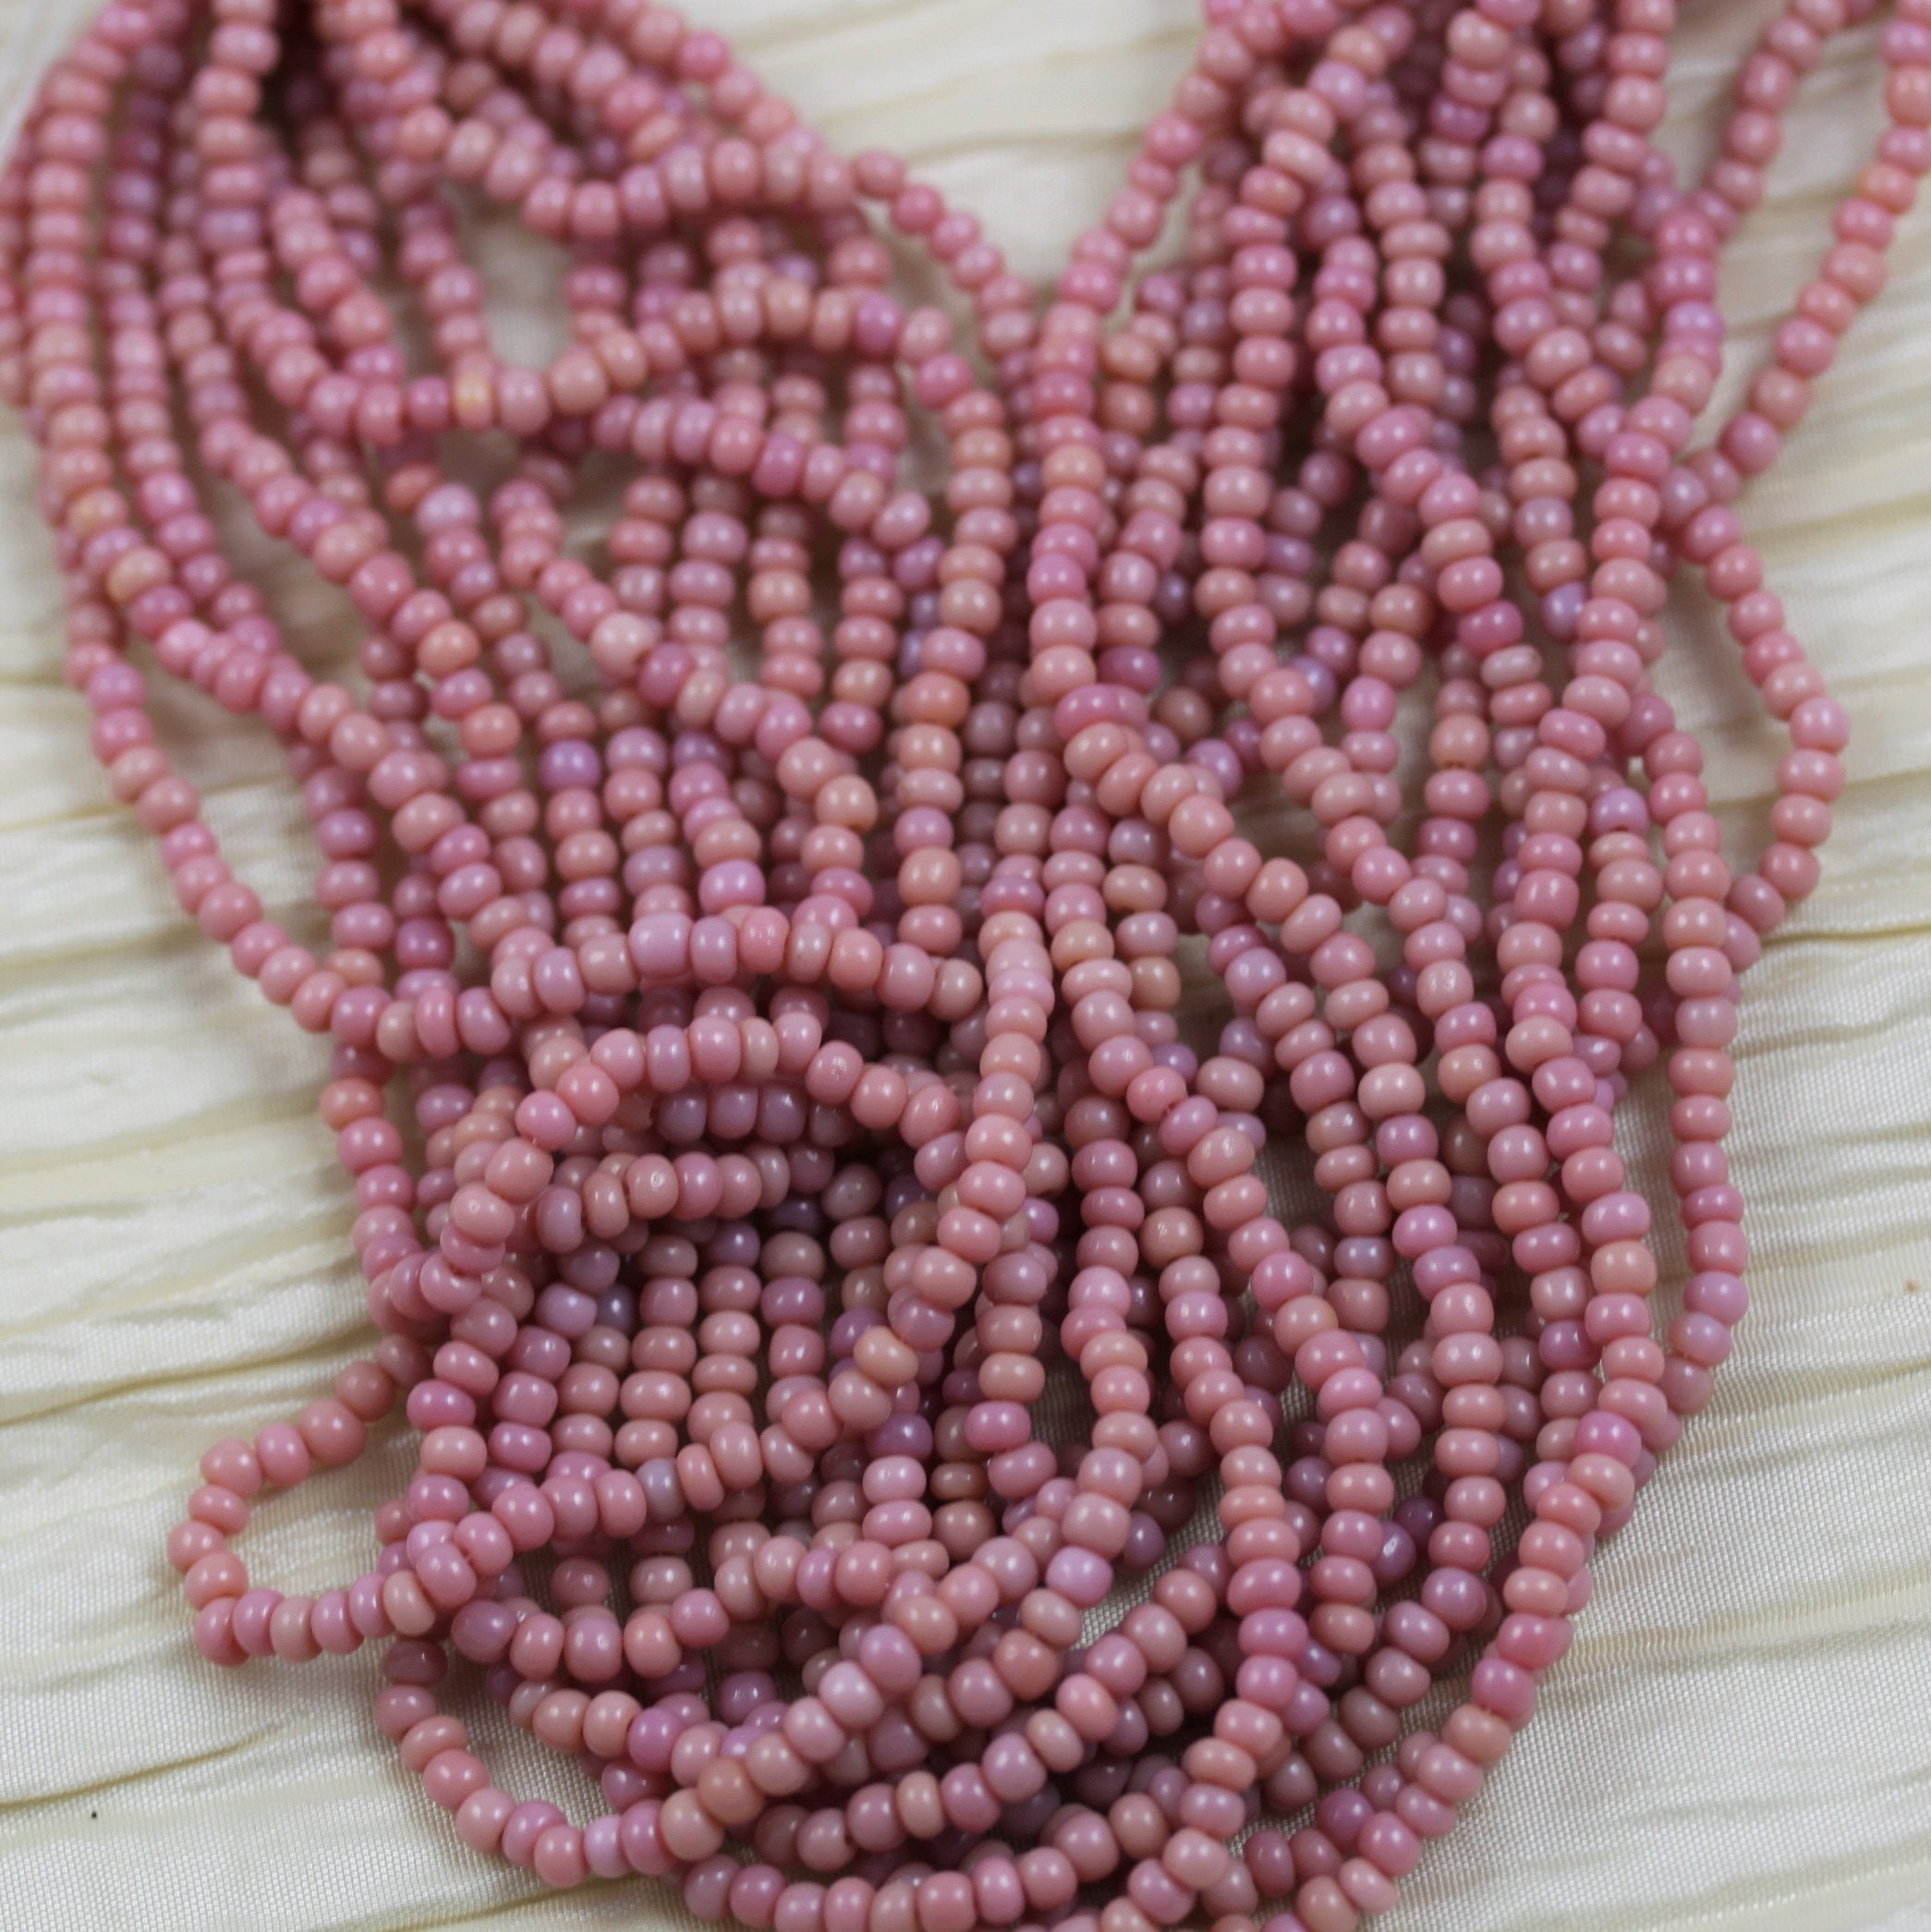 90's Vintage Czech Glass Seed Beads Collection in Shades of Pink - 8 colors  - Treefrog Beads